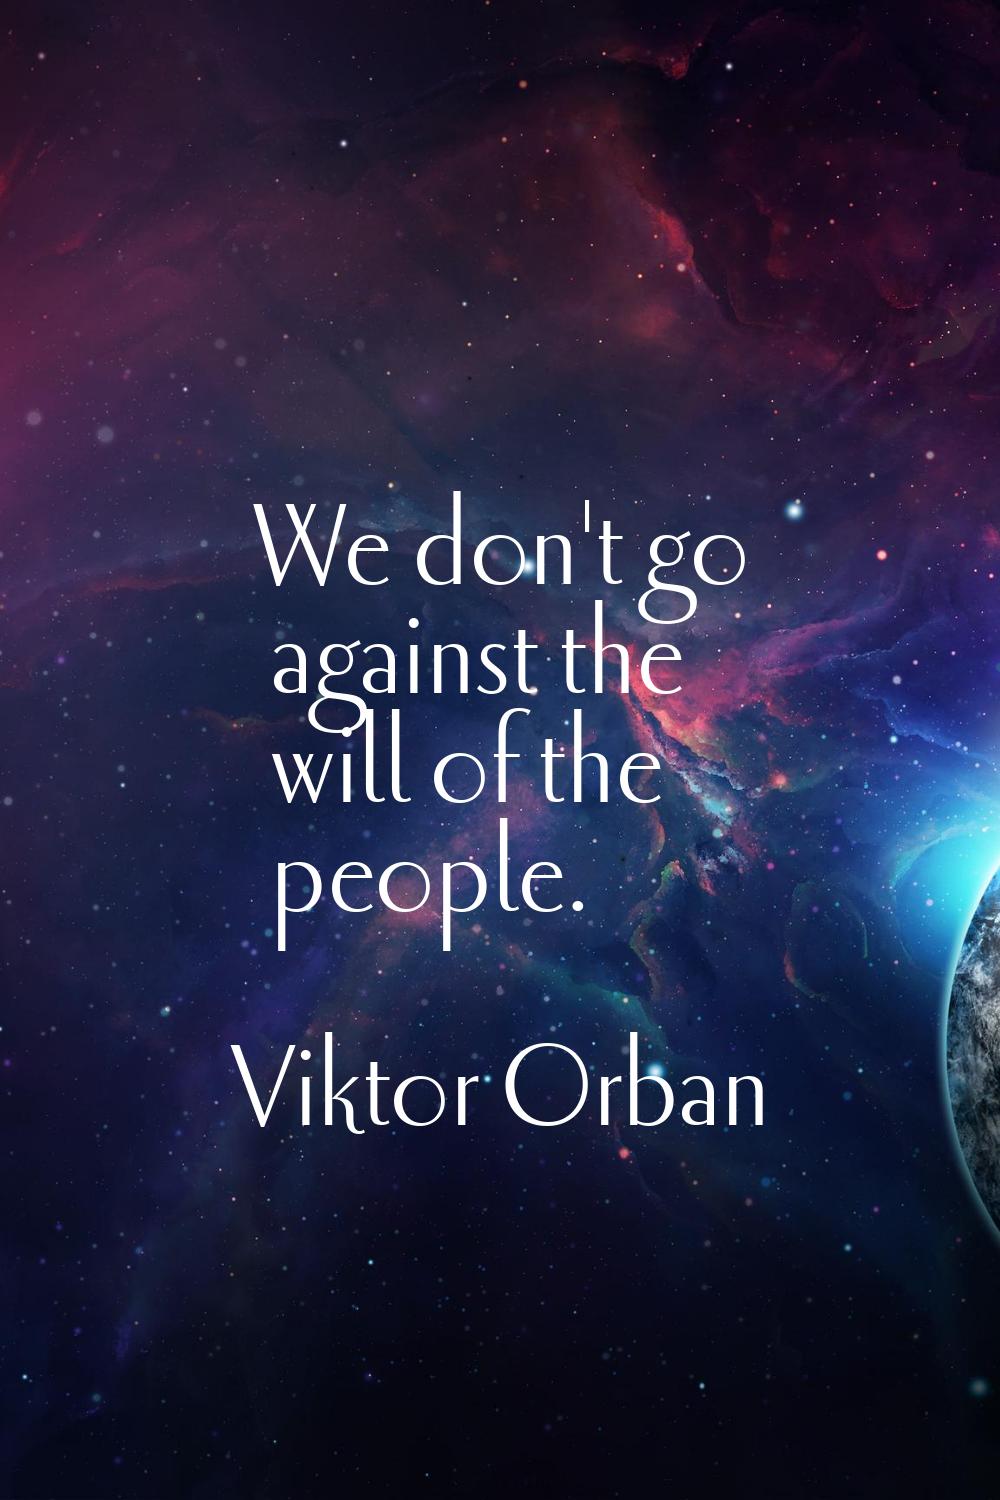 We don't go against the will of the people.